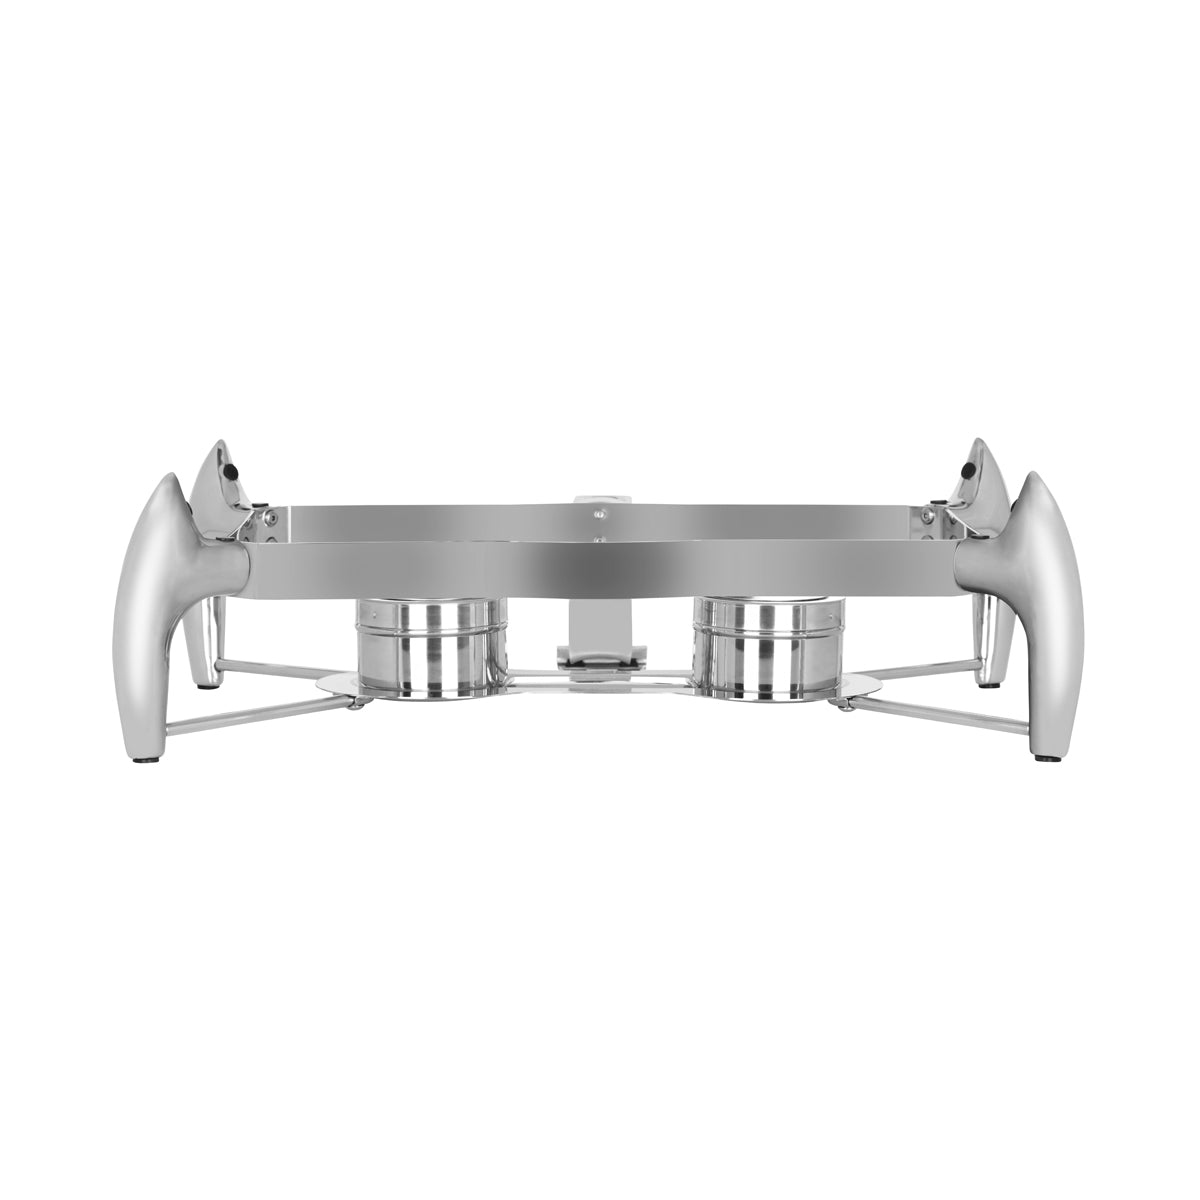 54910-S Chef Inox Delux Chafer Rectangular Stand Stainless Steel 1/1 Size to Suit 54910 Tomkin Australia Hospitality Supplies